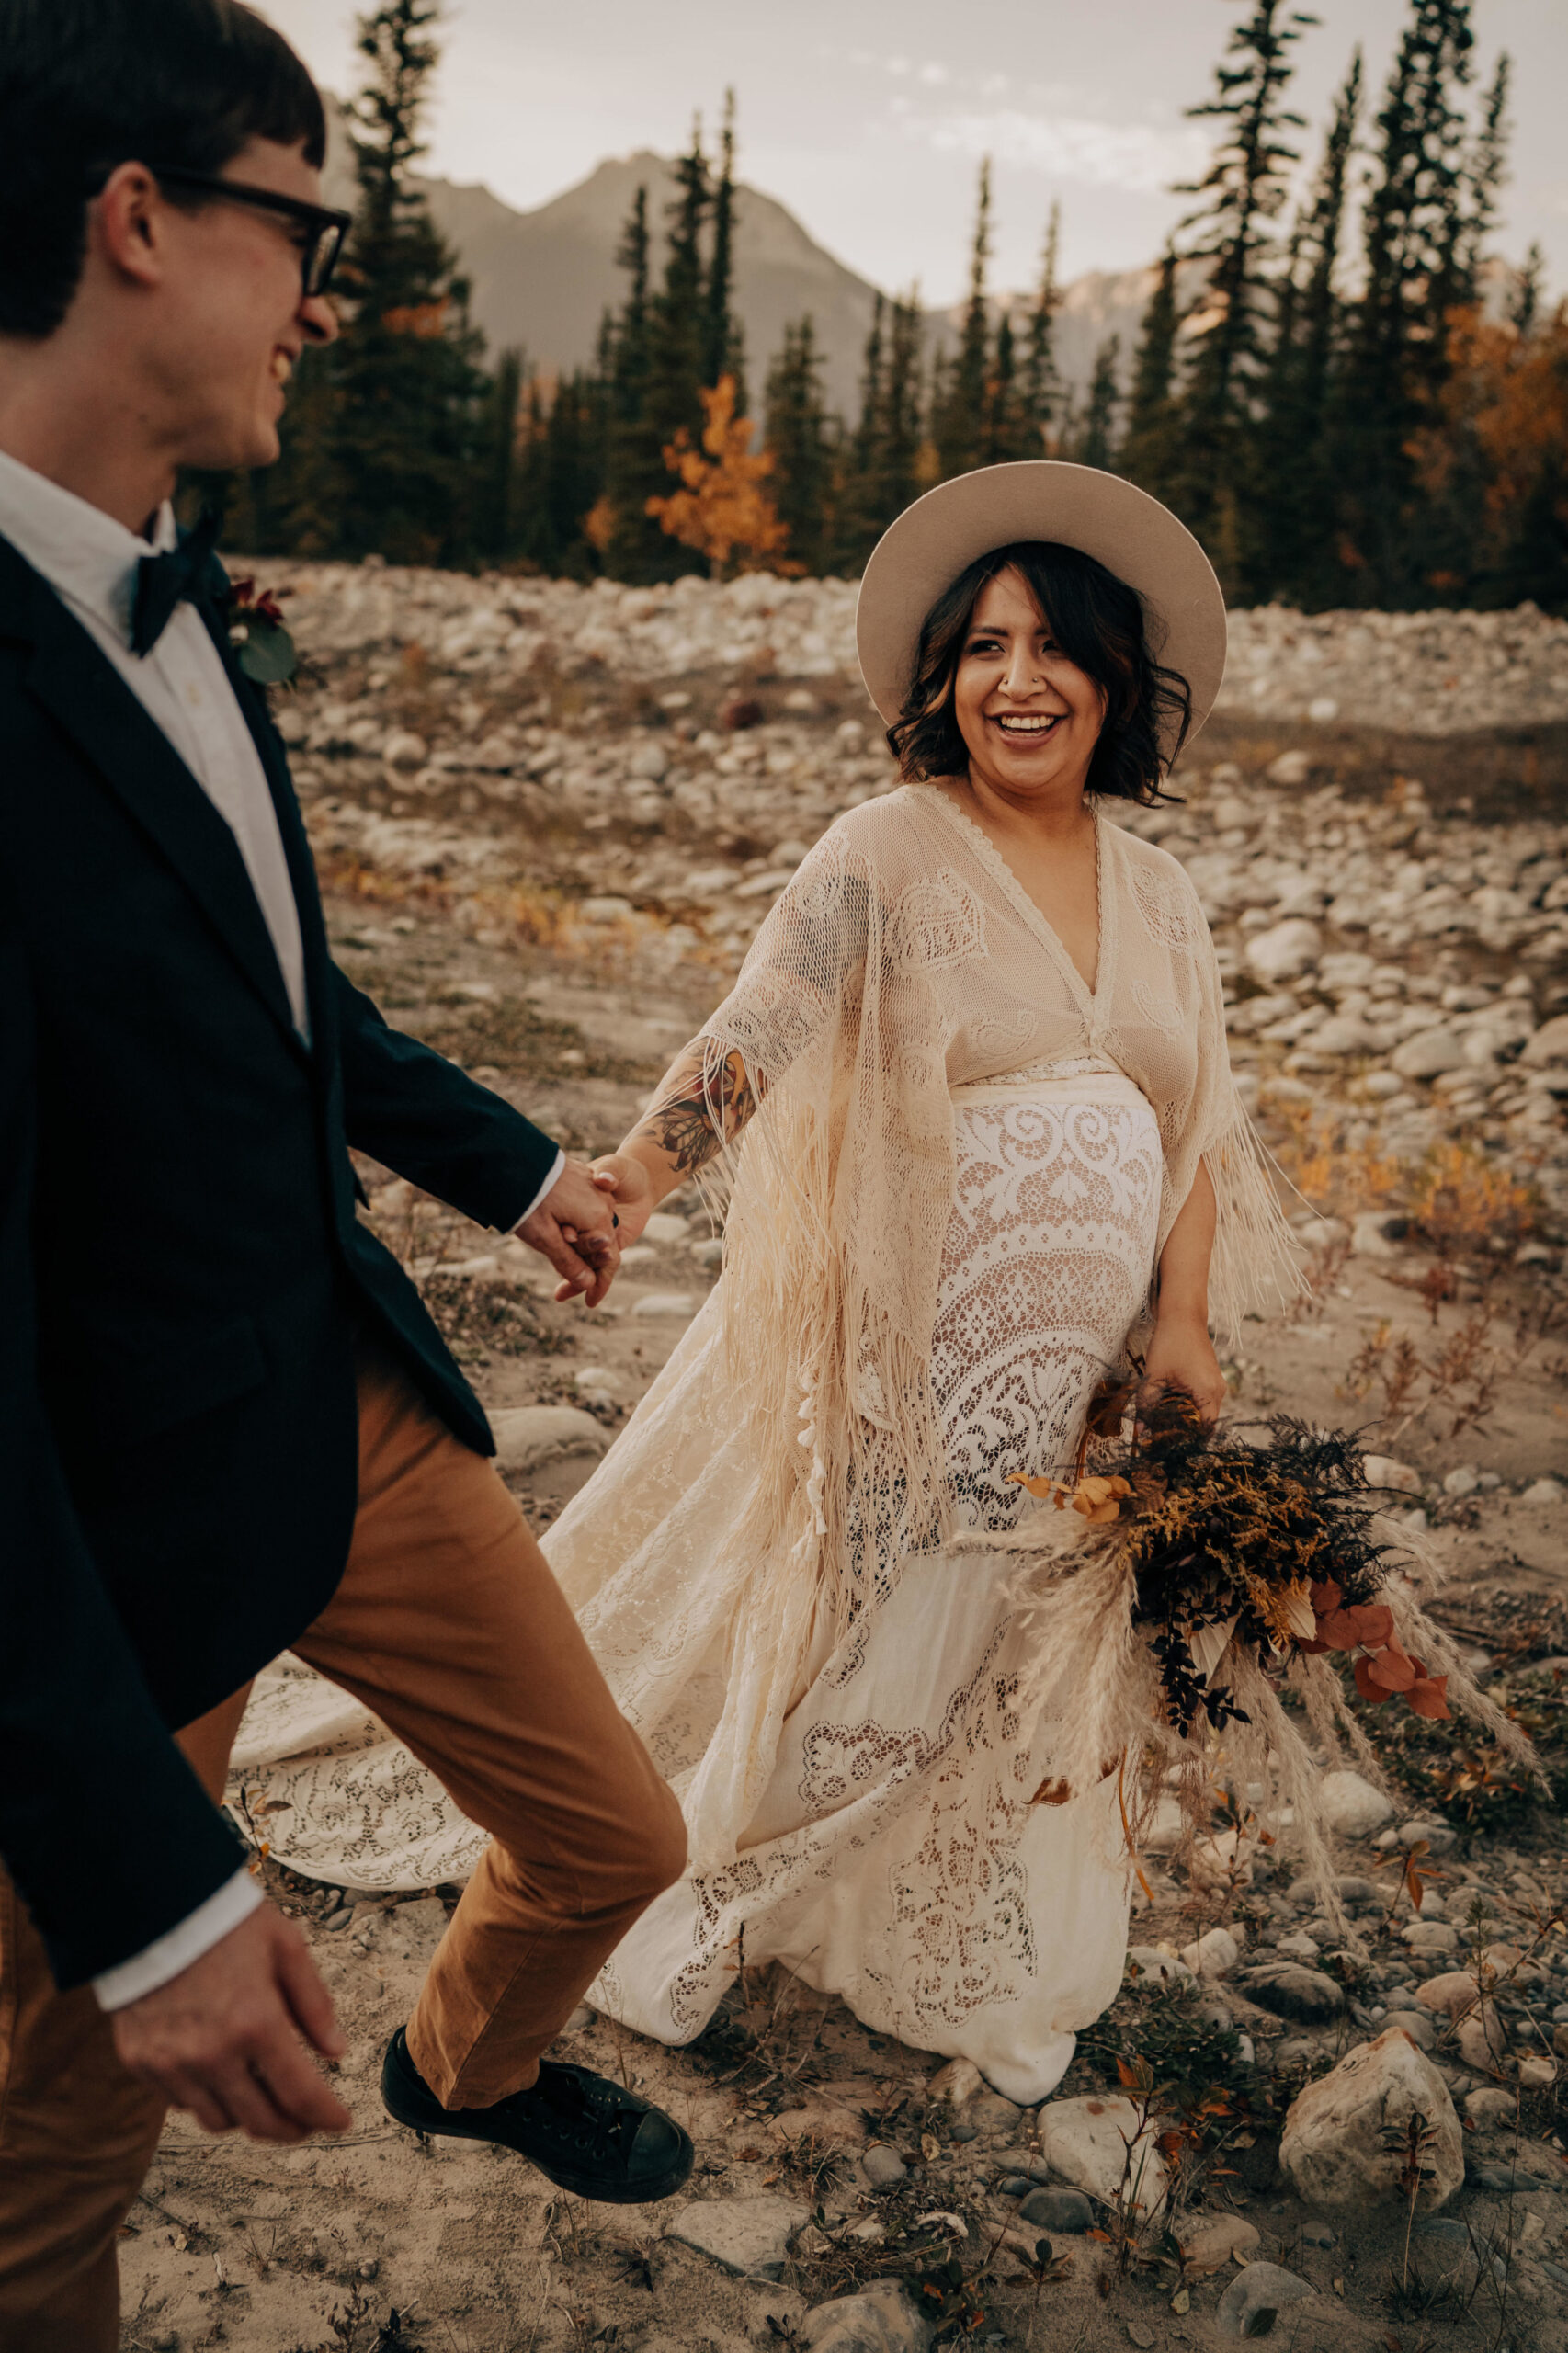 Boho bride in lace boho maternity wedding gown and boho groom standing in valley, holding hands and looking at each other